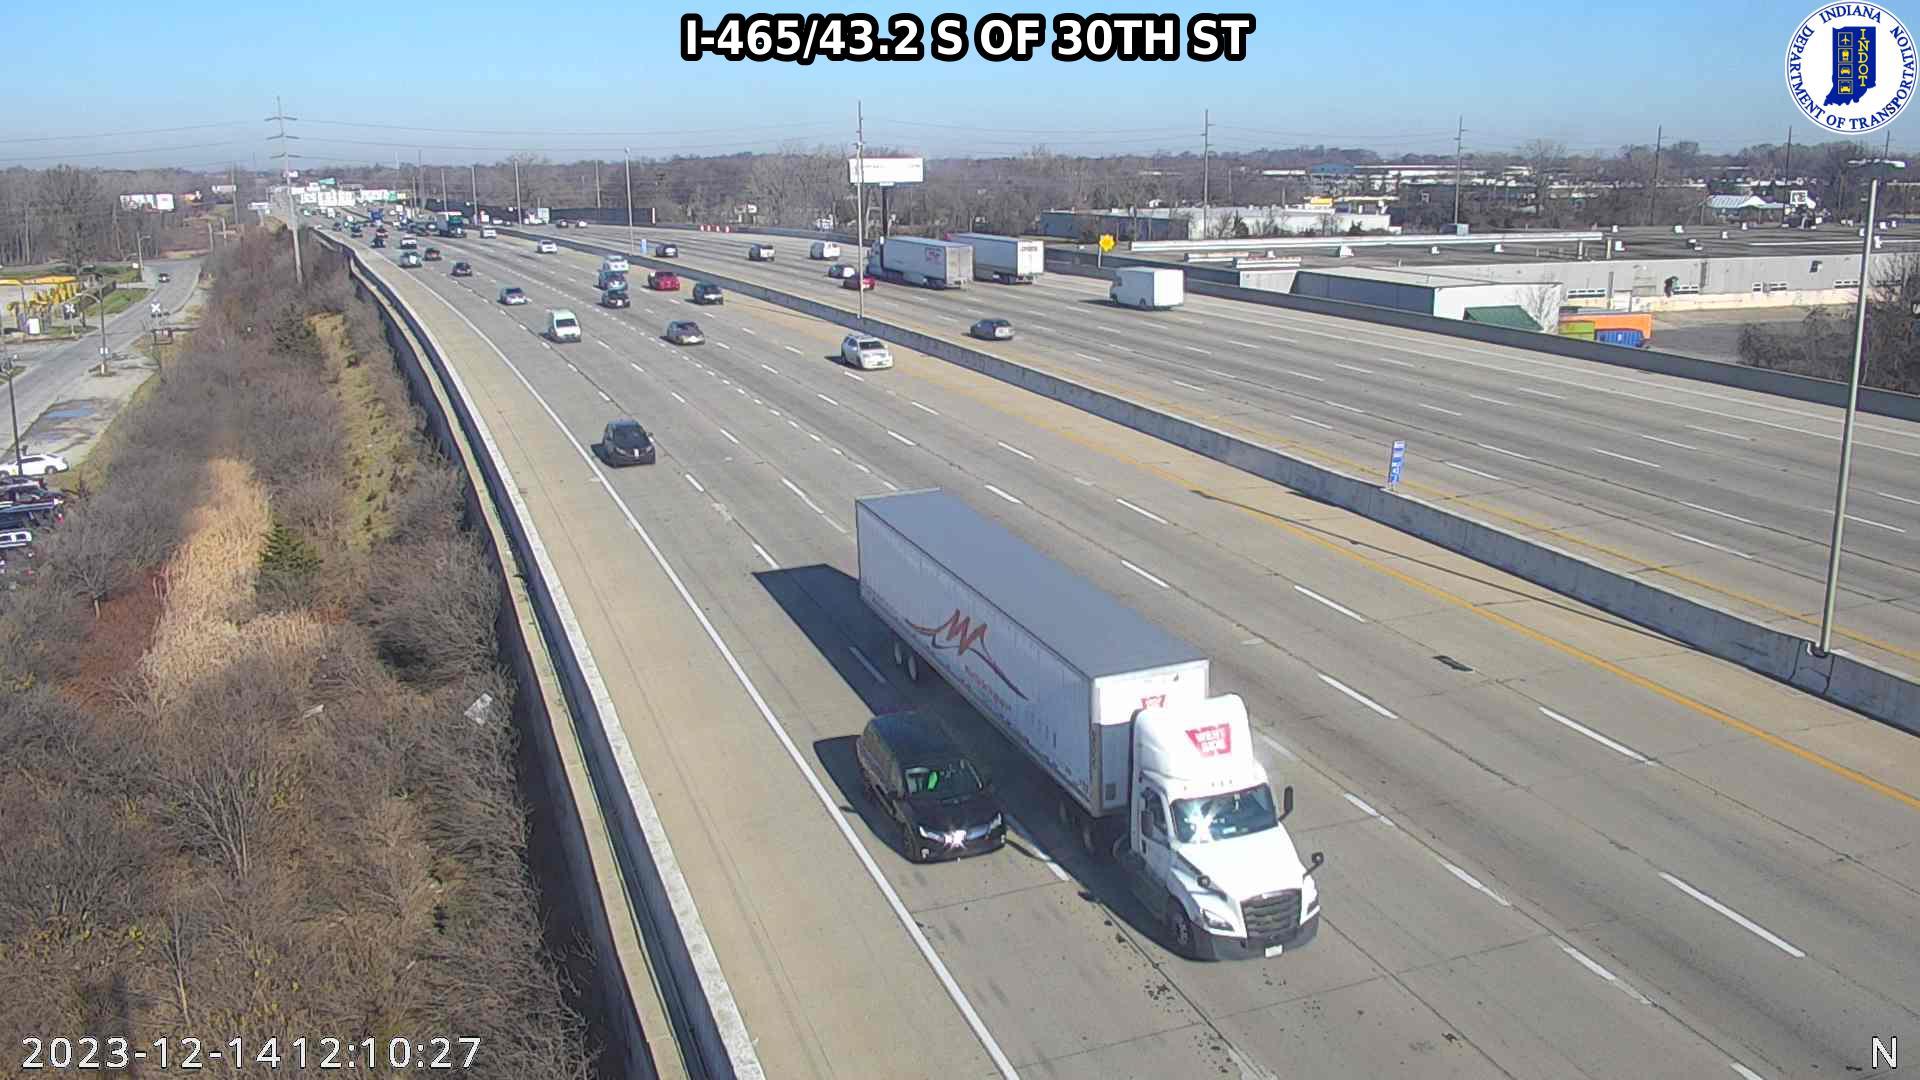 Traffic Cam Indianapolis: I-465: I-465/43.2 S OF 30TH ST